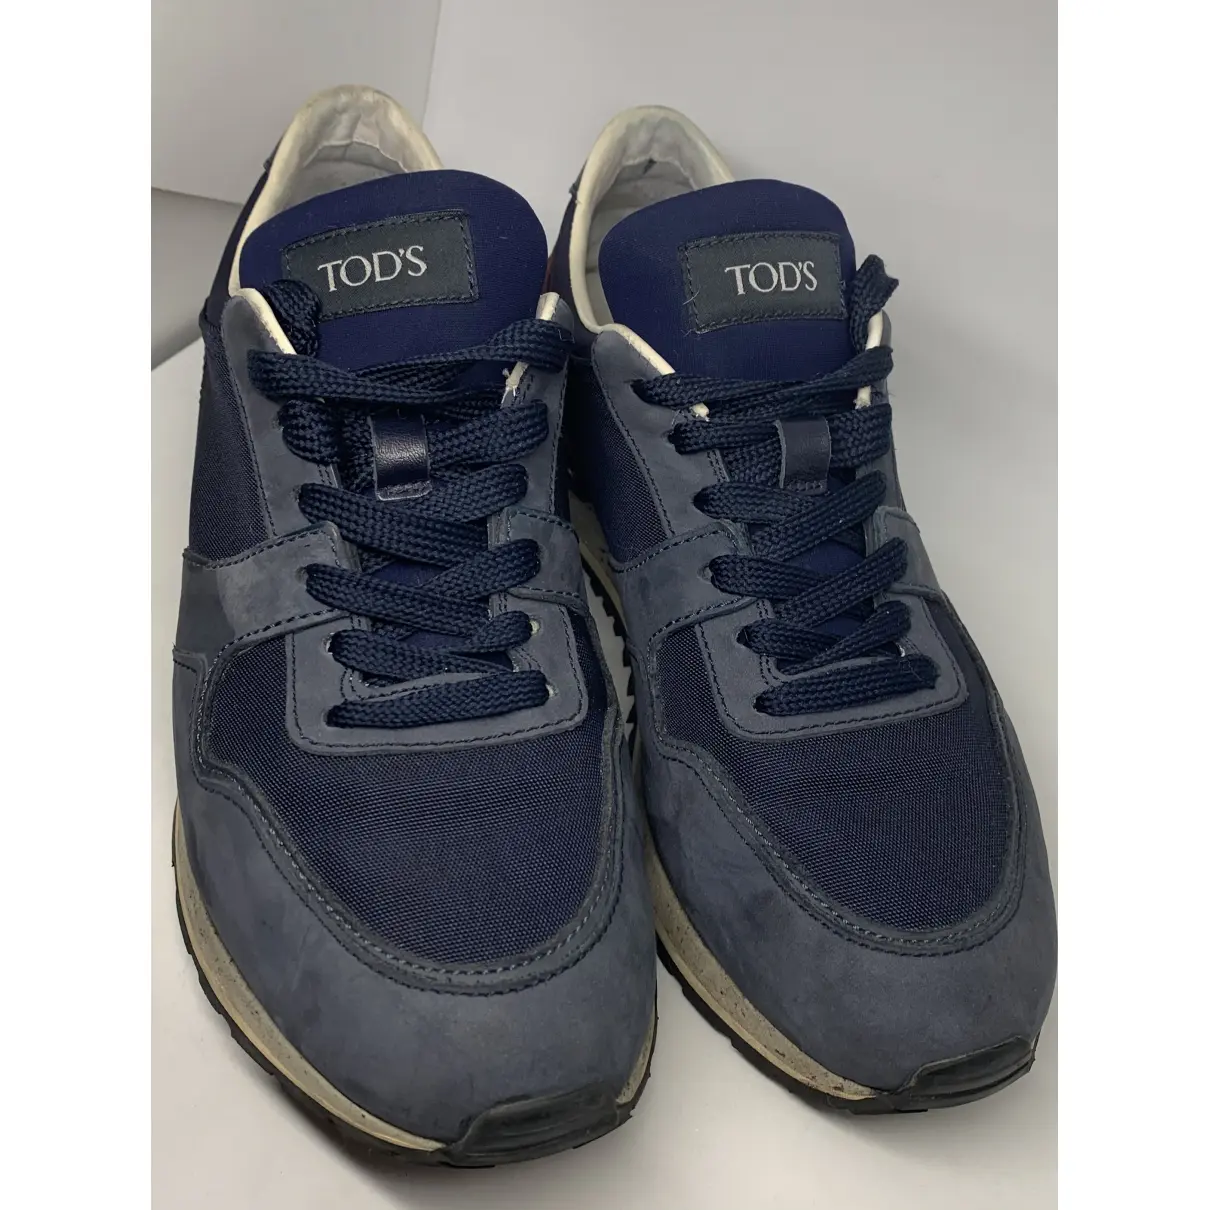 Buy Tod's Trainers online